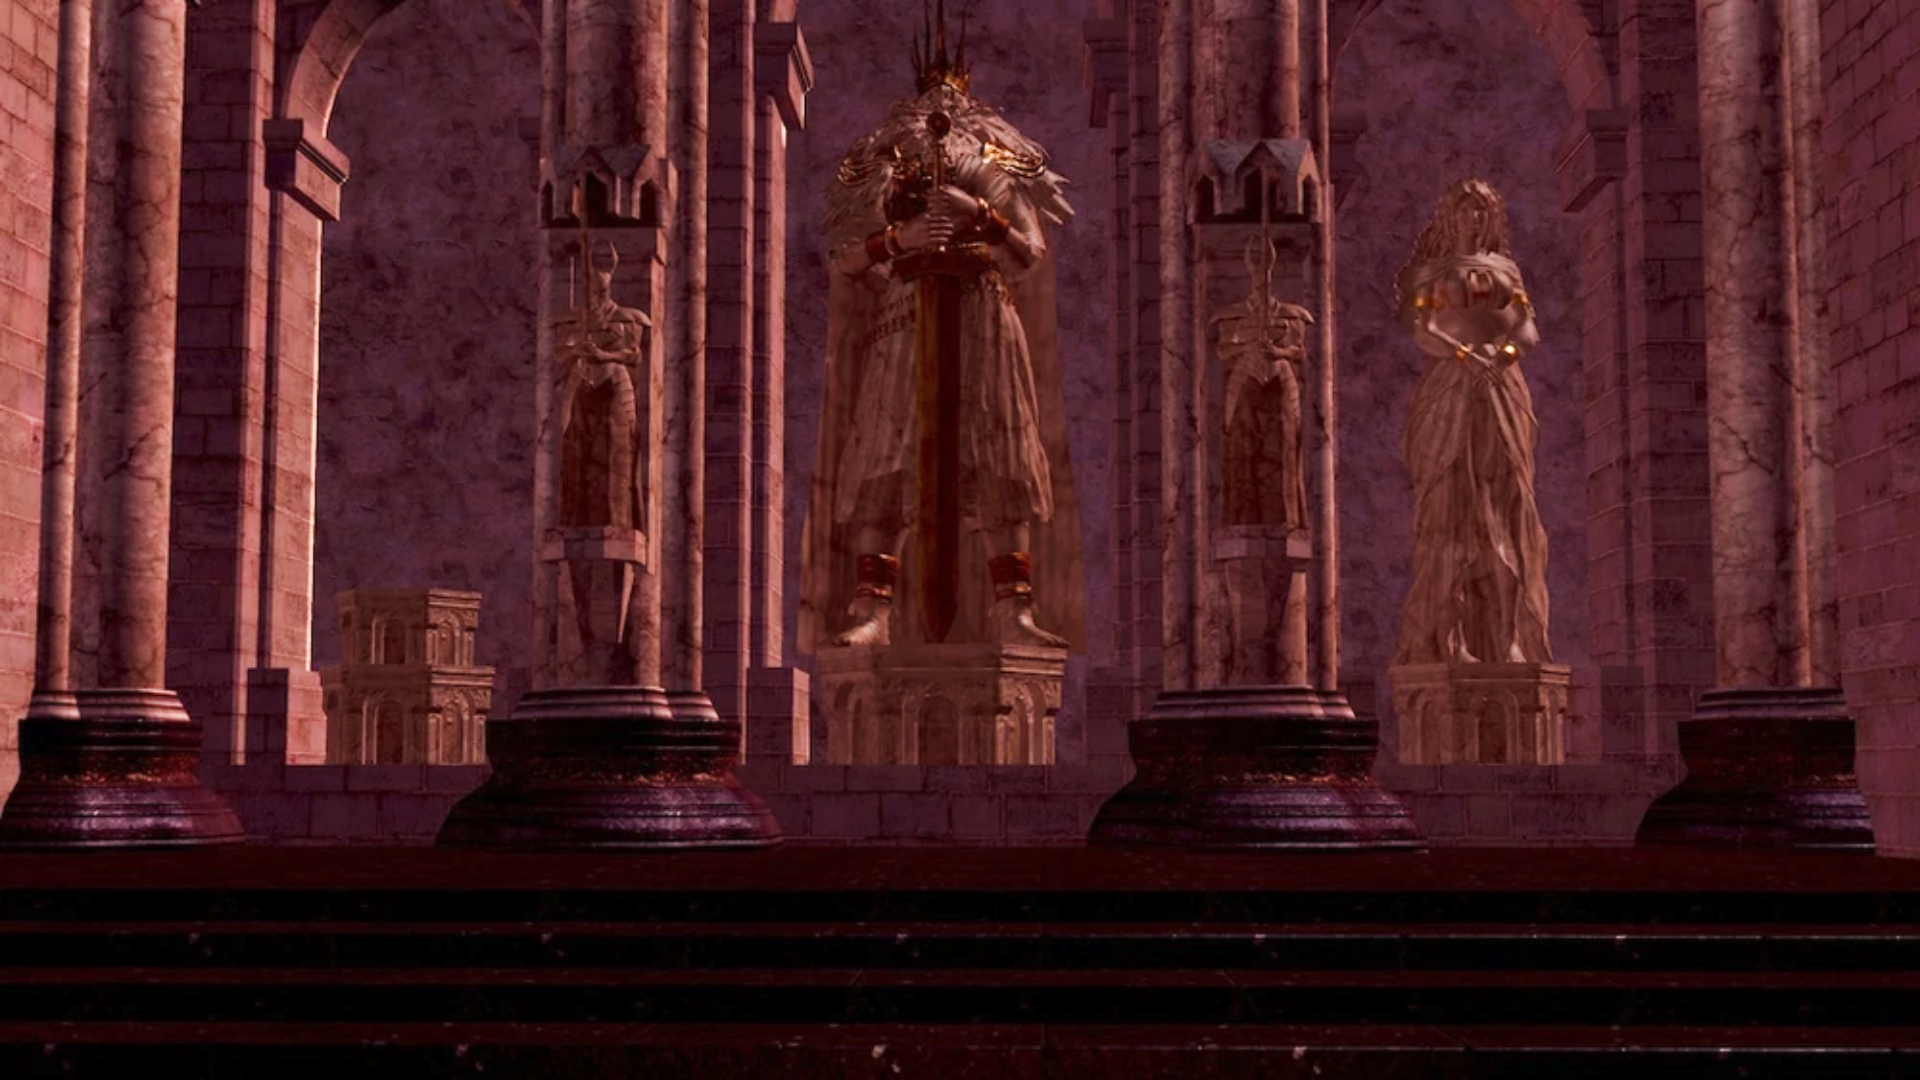 Statues of Gwyn and Gwynevere in Anor Londo